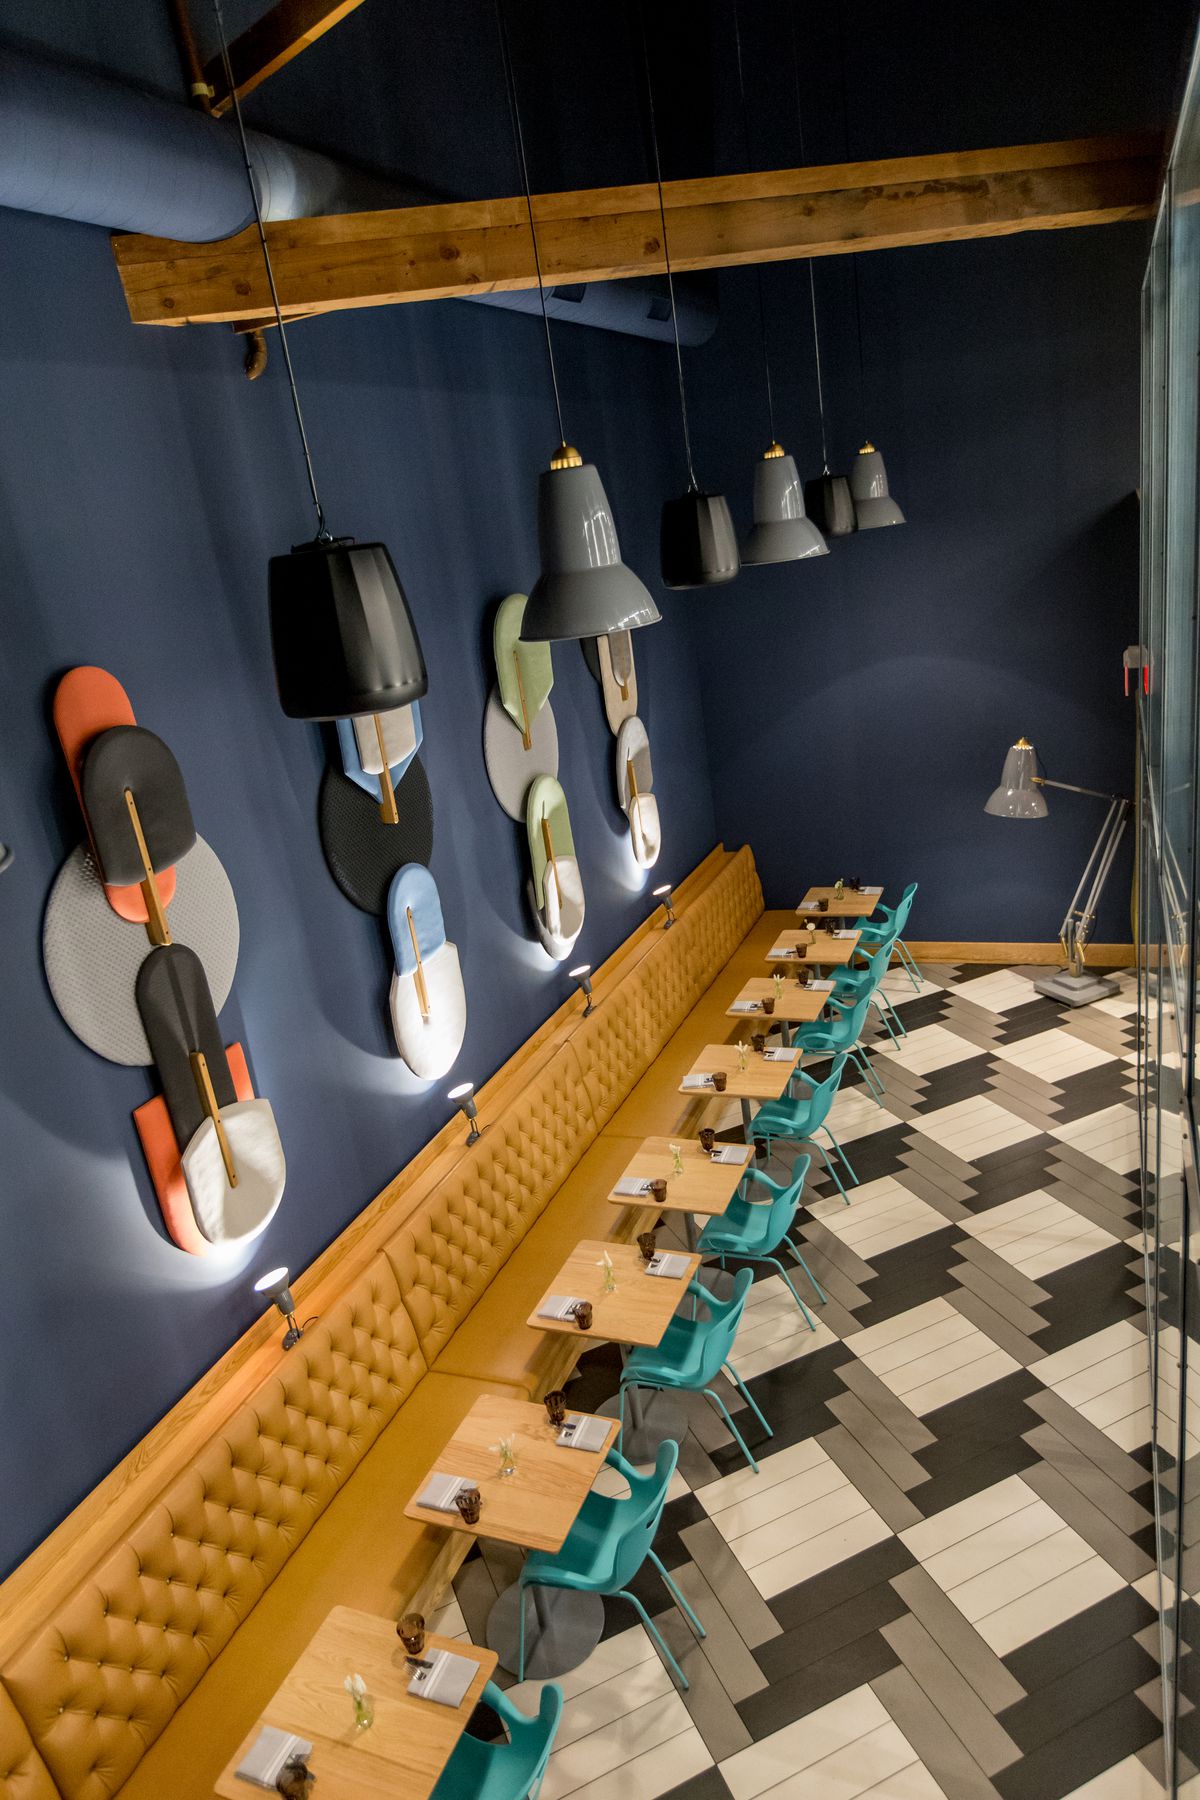 A picture of Enoteca Nostrana’s back room, which uses colorful, abstract pizza paddles as decoration